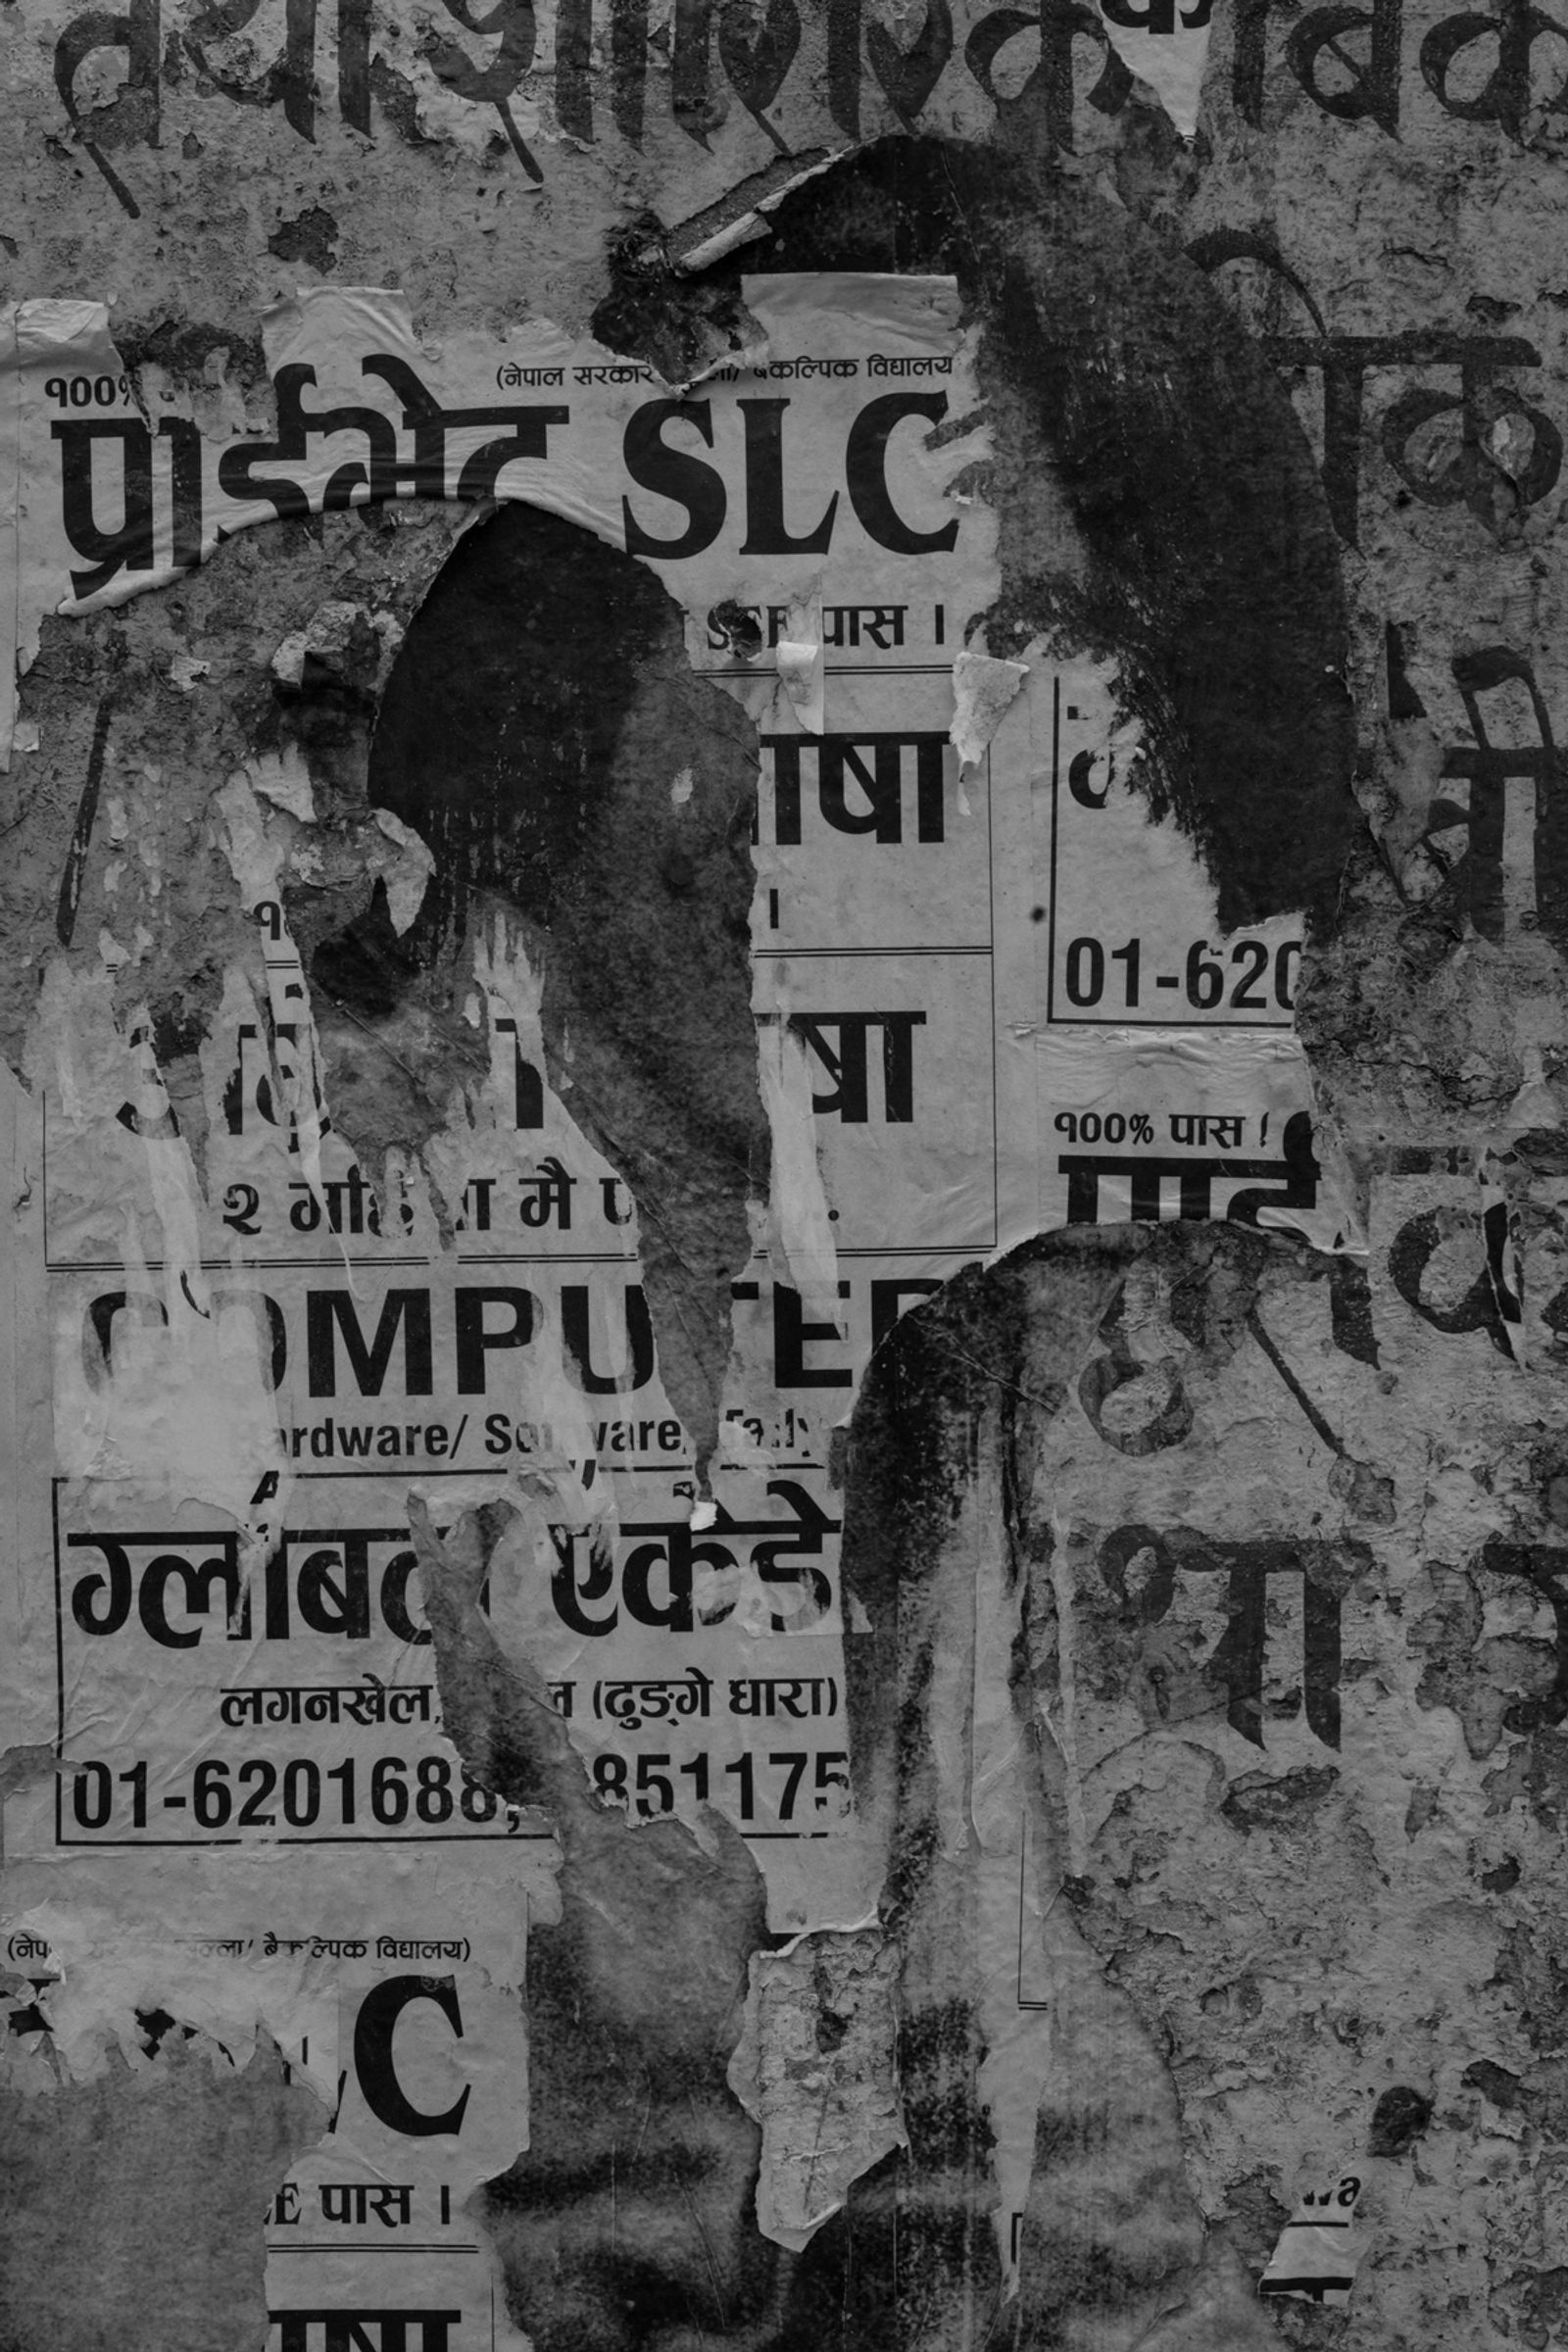 © Stephen Dock - A ragged poster for computing classes stuck on a wall hides a portrait, in Patan, Nepal.